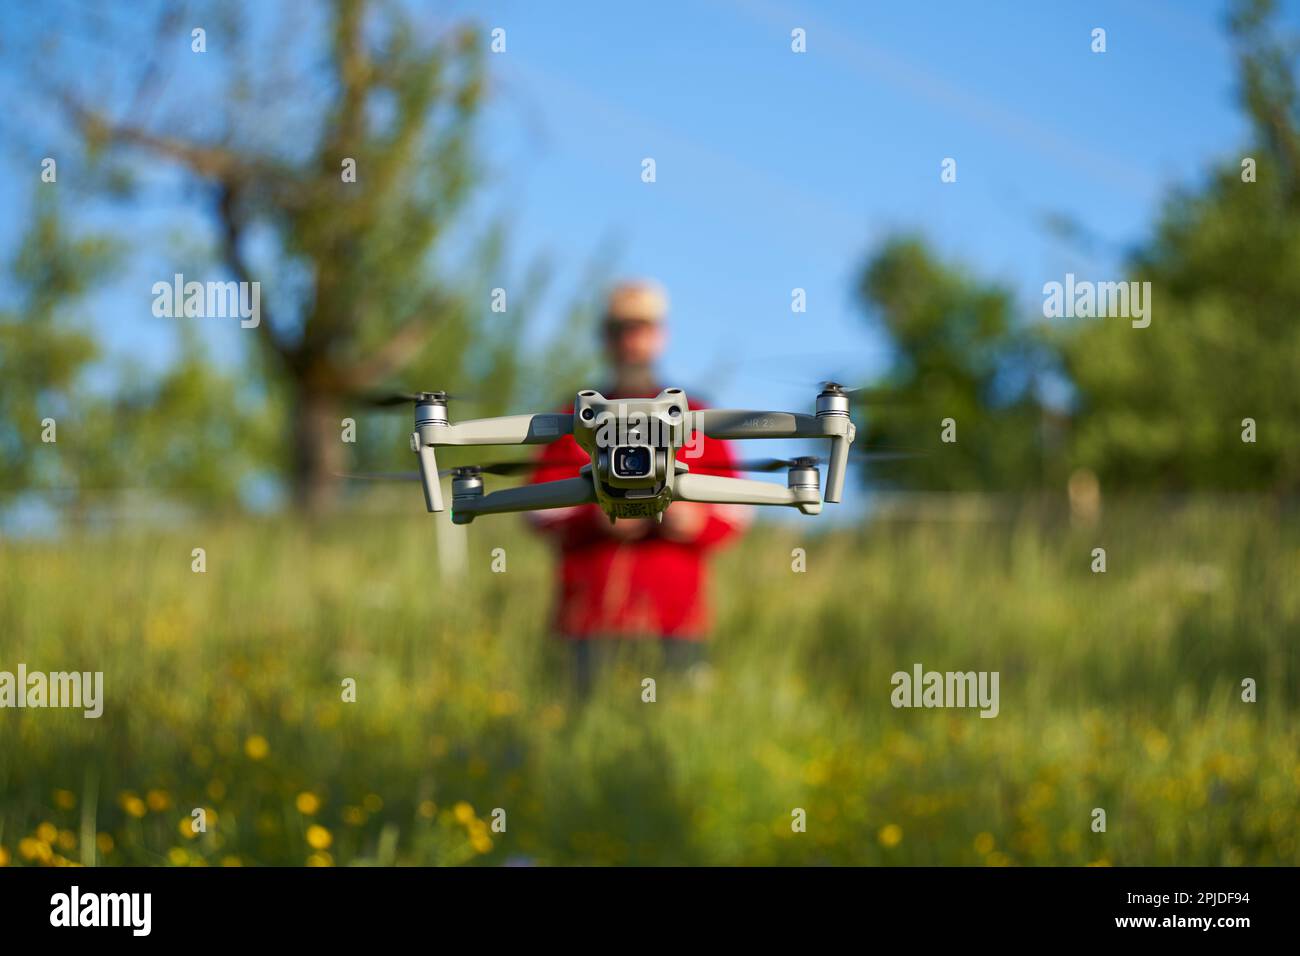 Nürtingen, Germany - May 29, 2021: Drone dji air 2s hovers over a field of wildflowers. Blurred pilot with red jacket controls the unmanned aircraft s Stock Photo